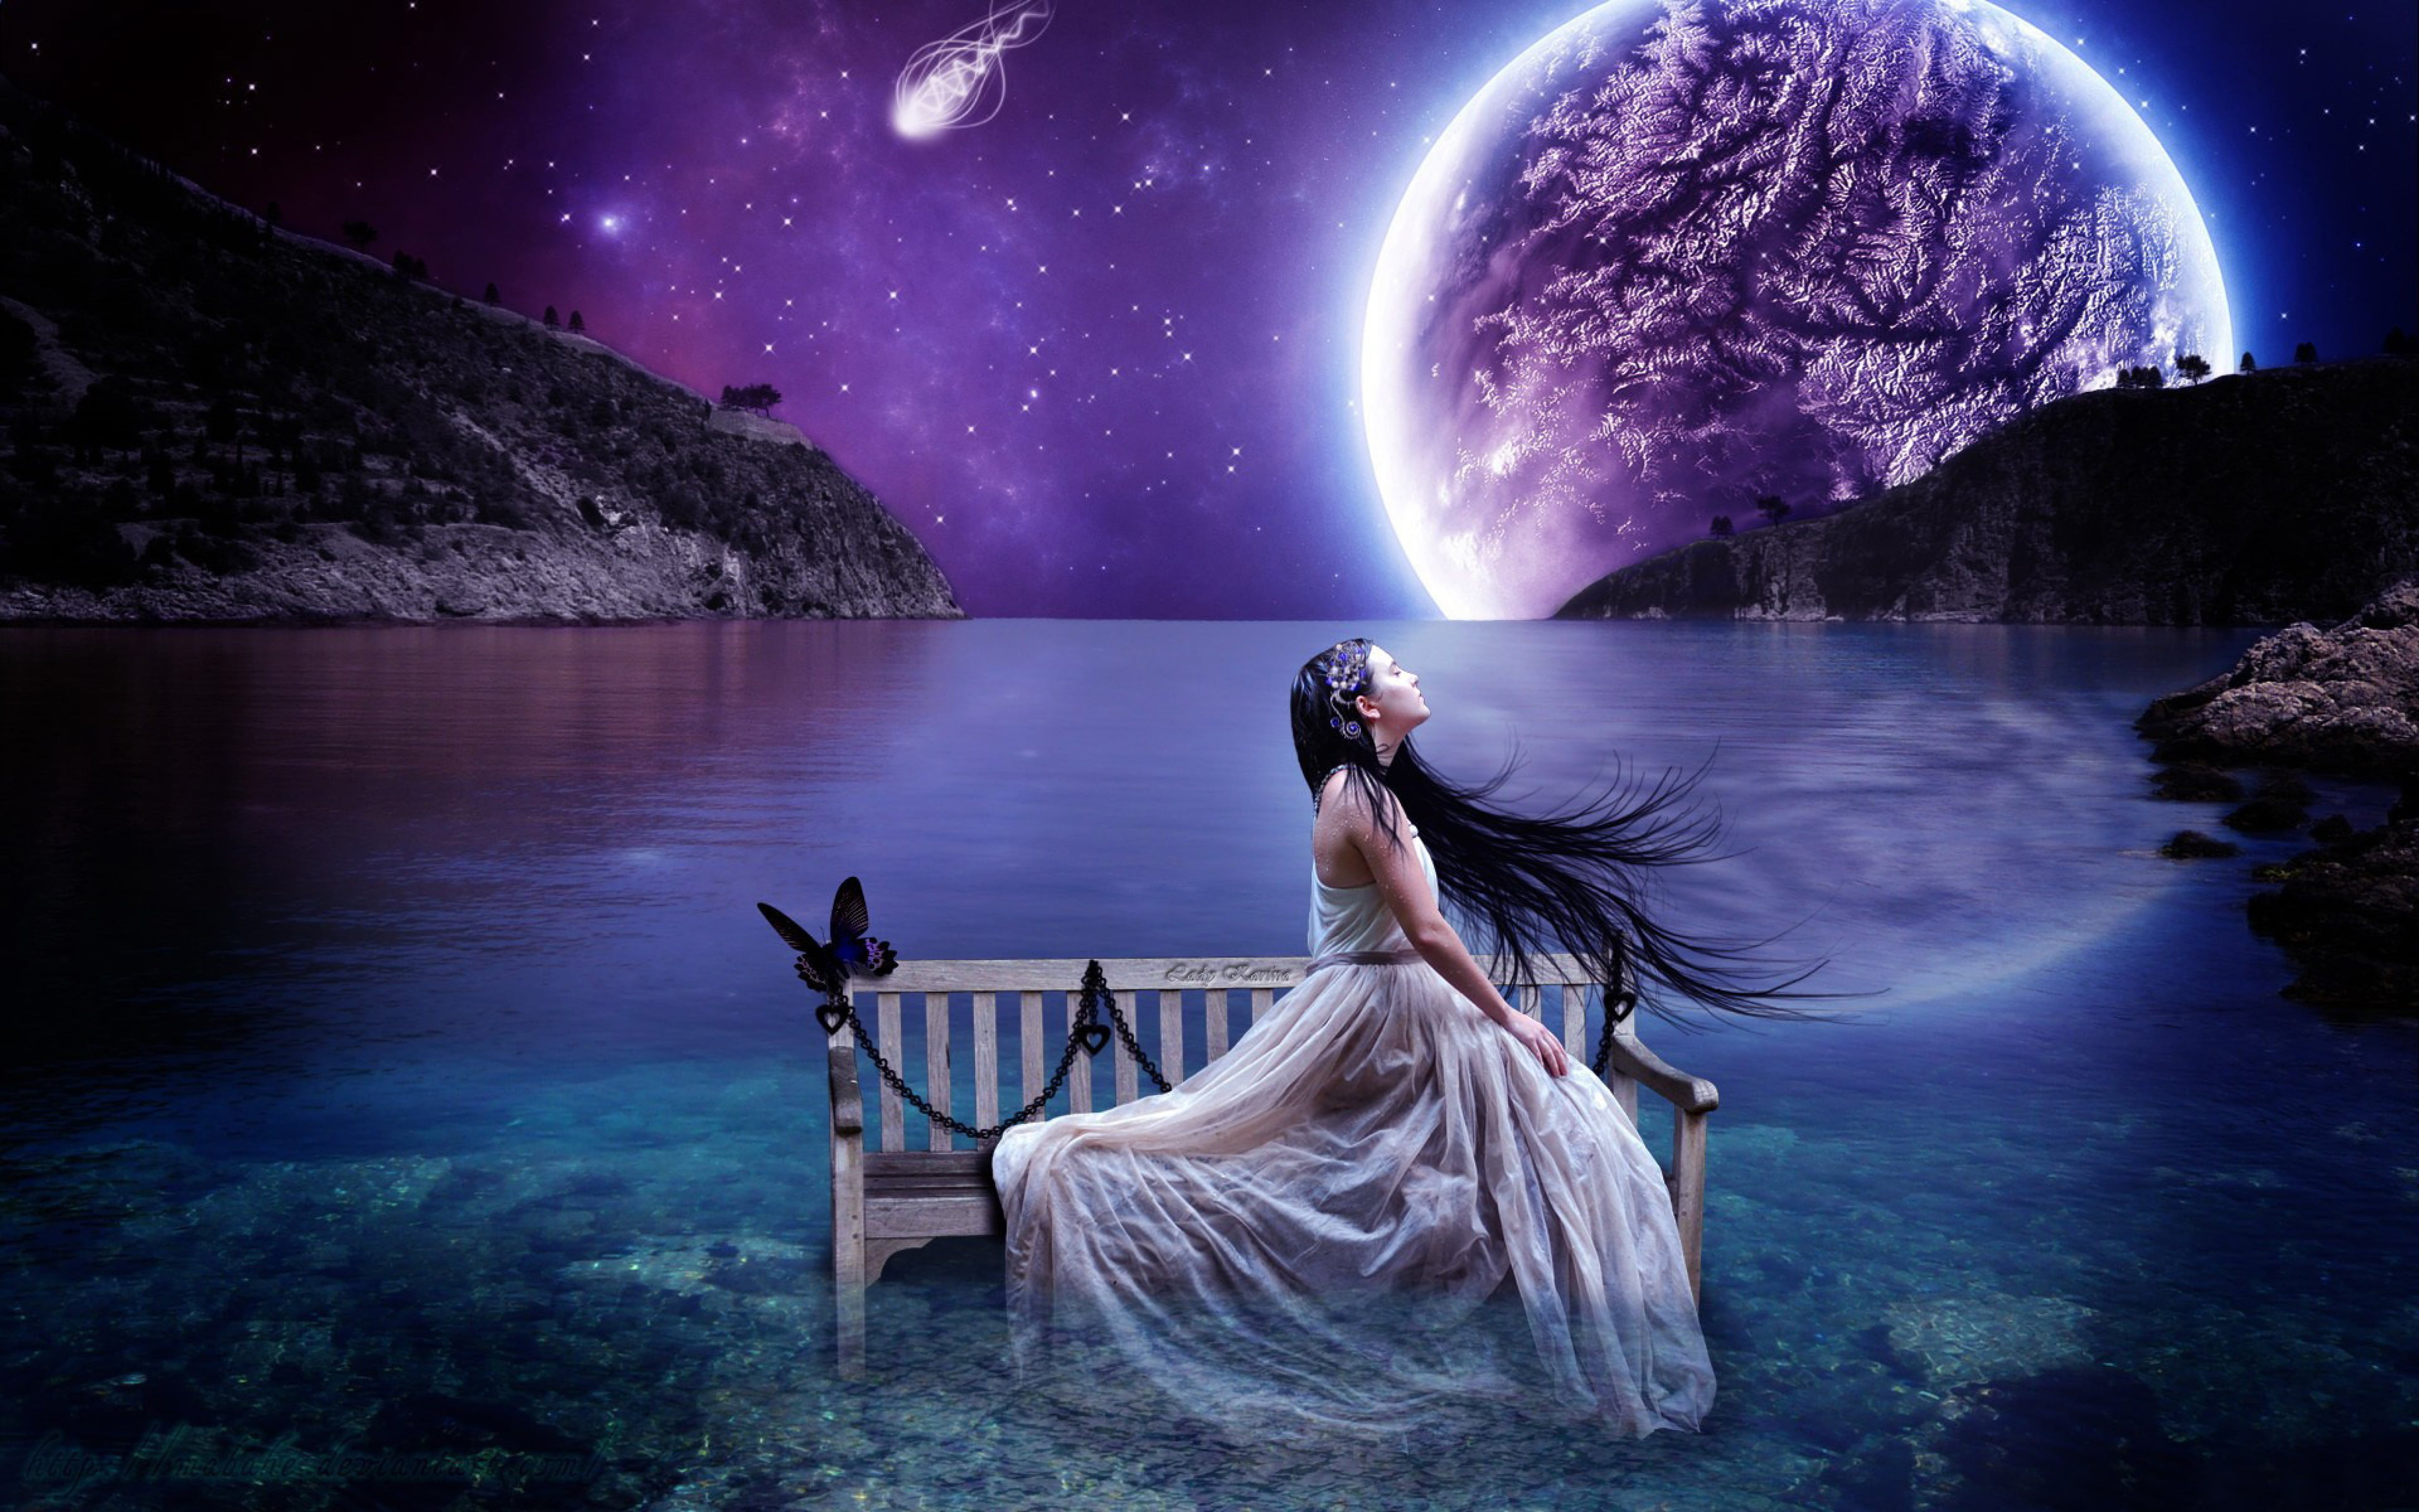 Cool Fantasy Girl Wallpaper 8468, water, night, moon, beauty in nature